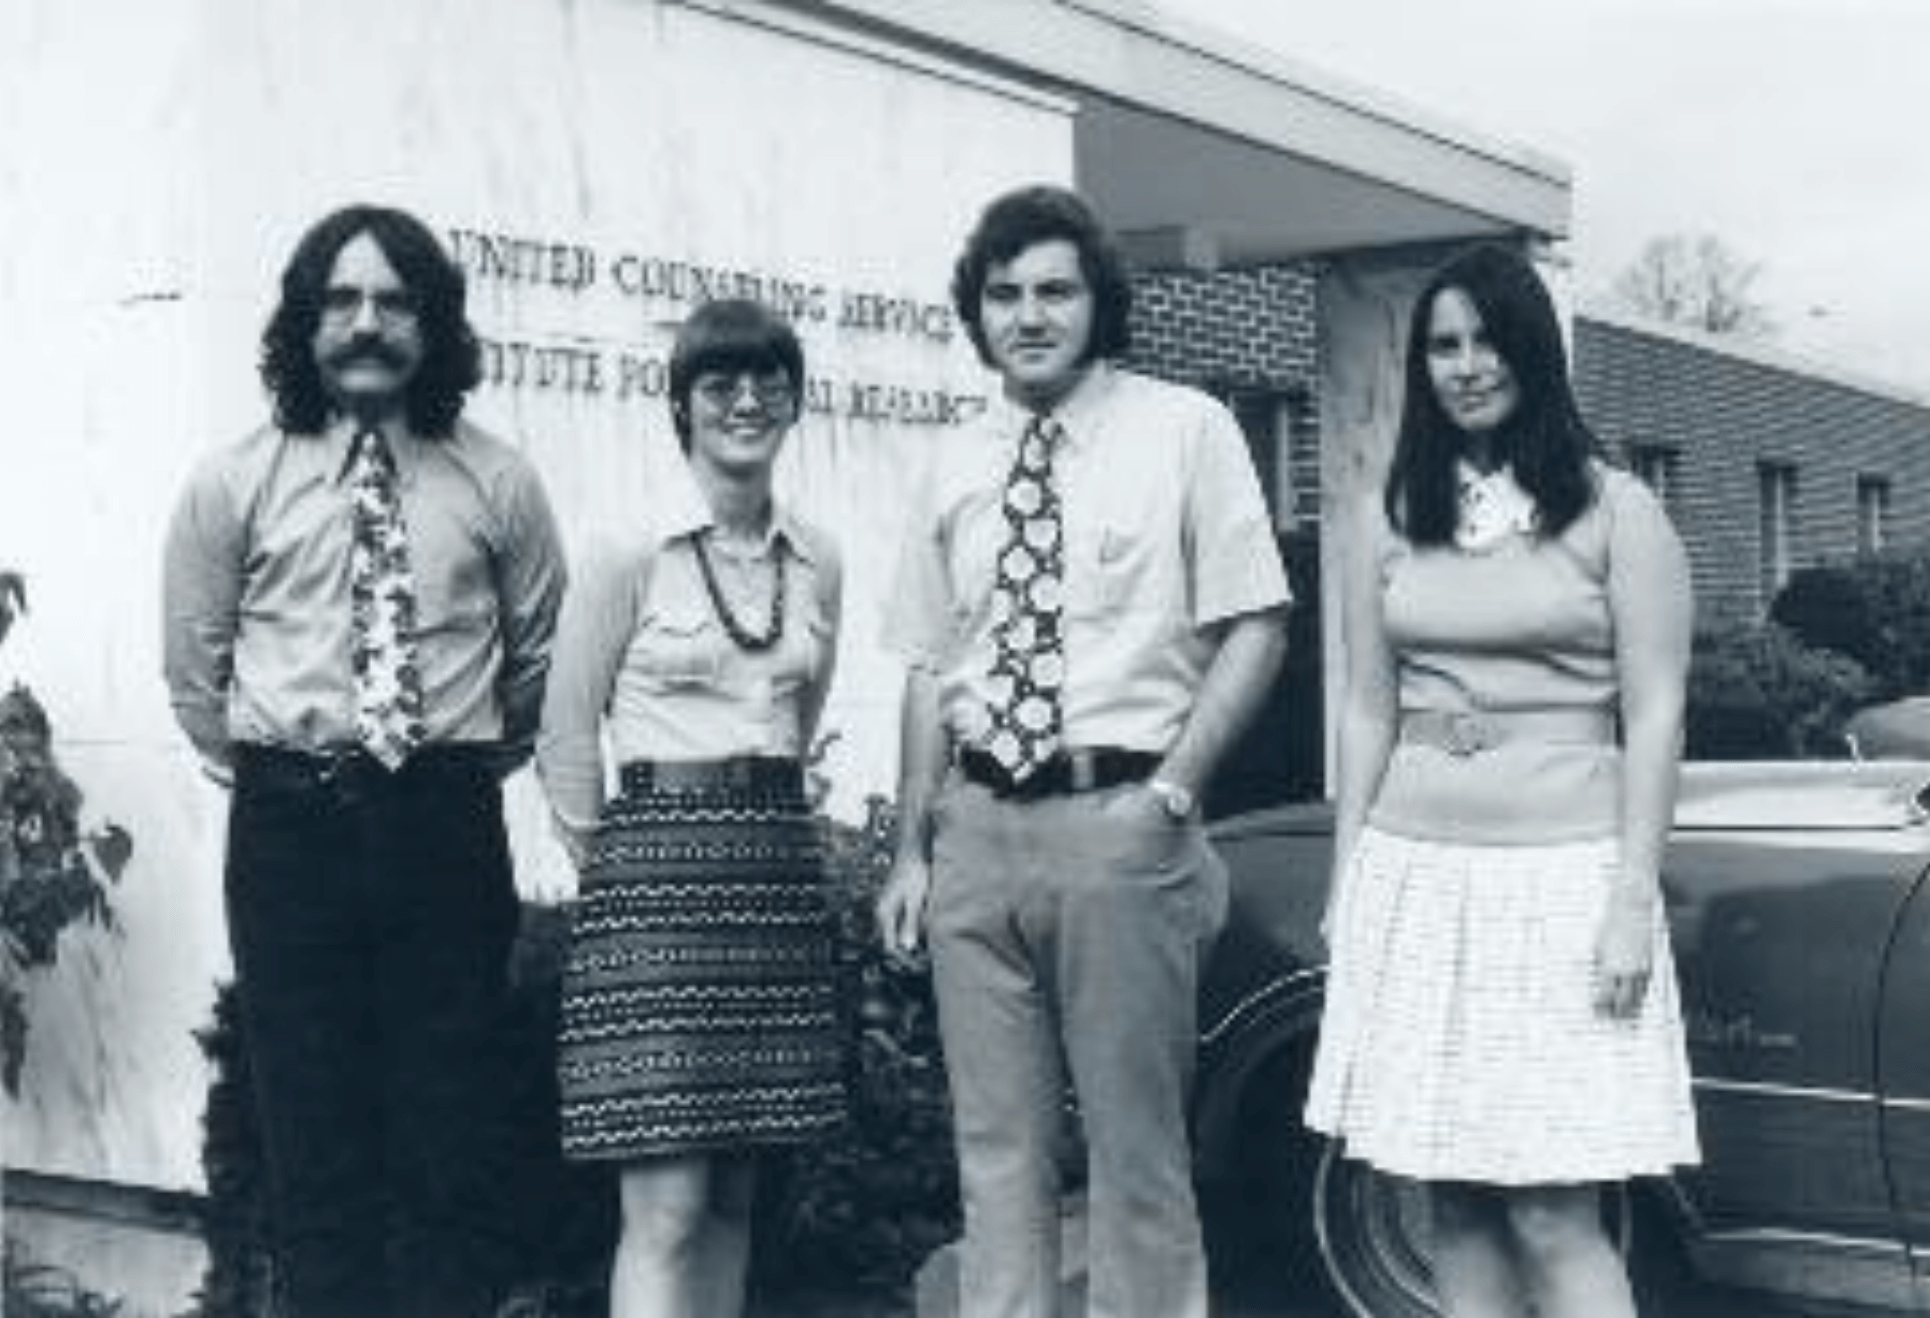 A black and white photo of two men and two women in front of an old United Counseling Service sign. This appears to be taken in the 1960s or 70s